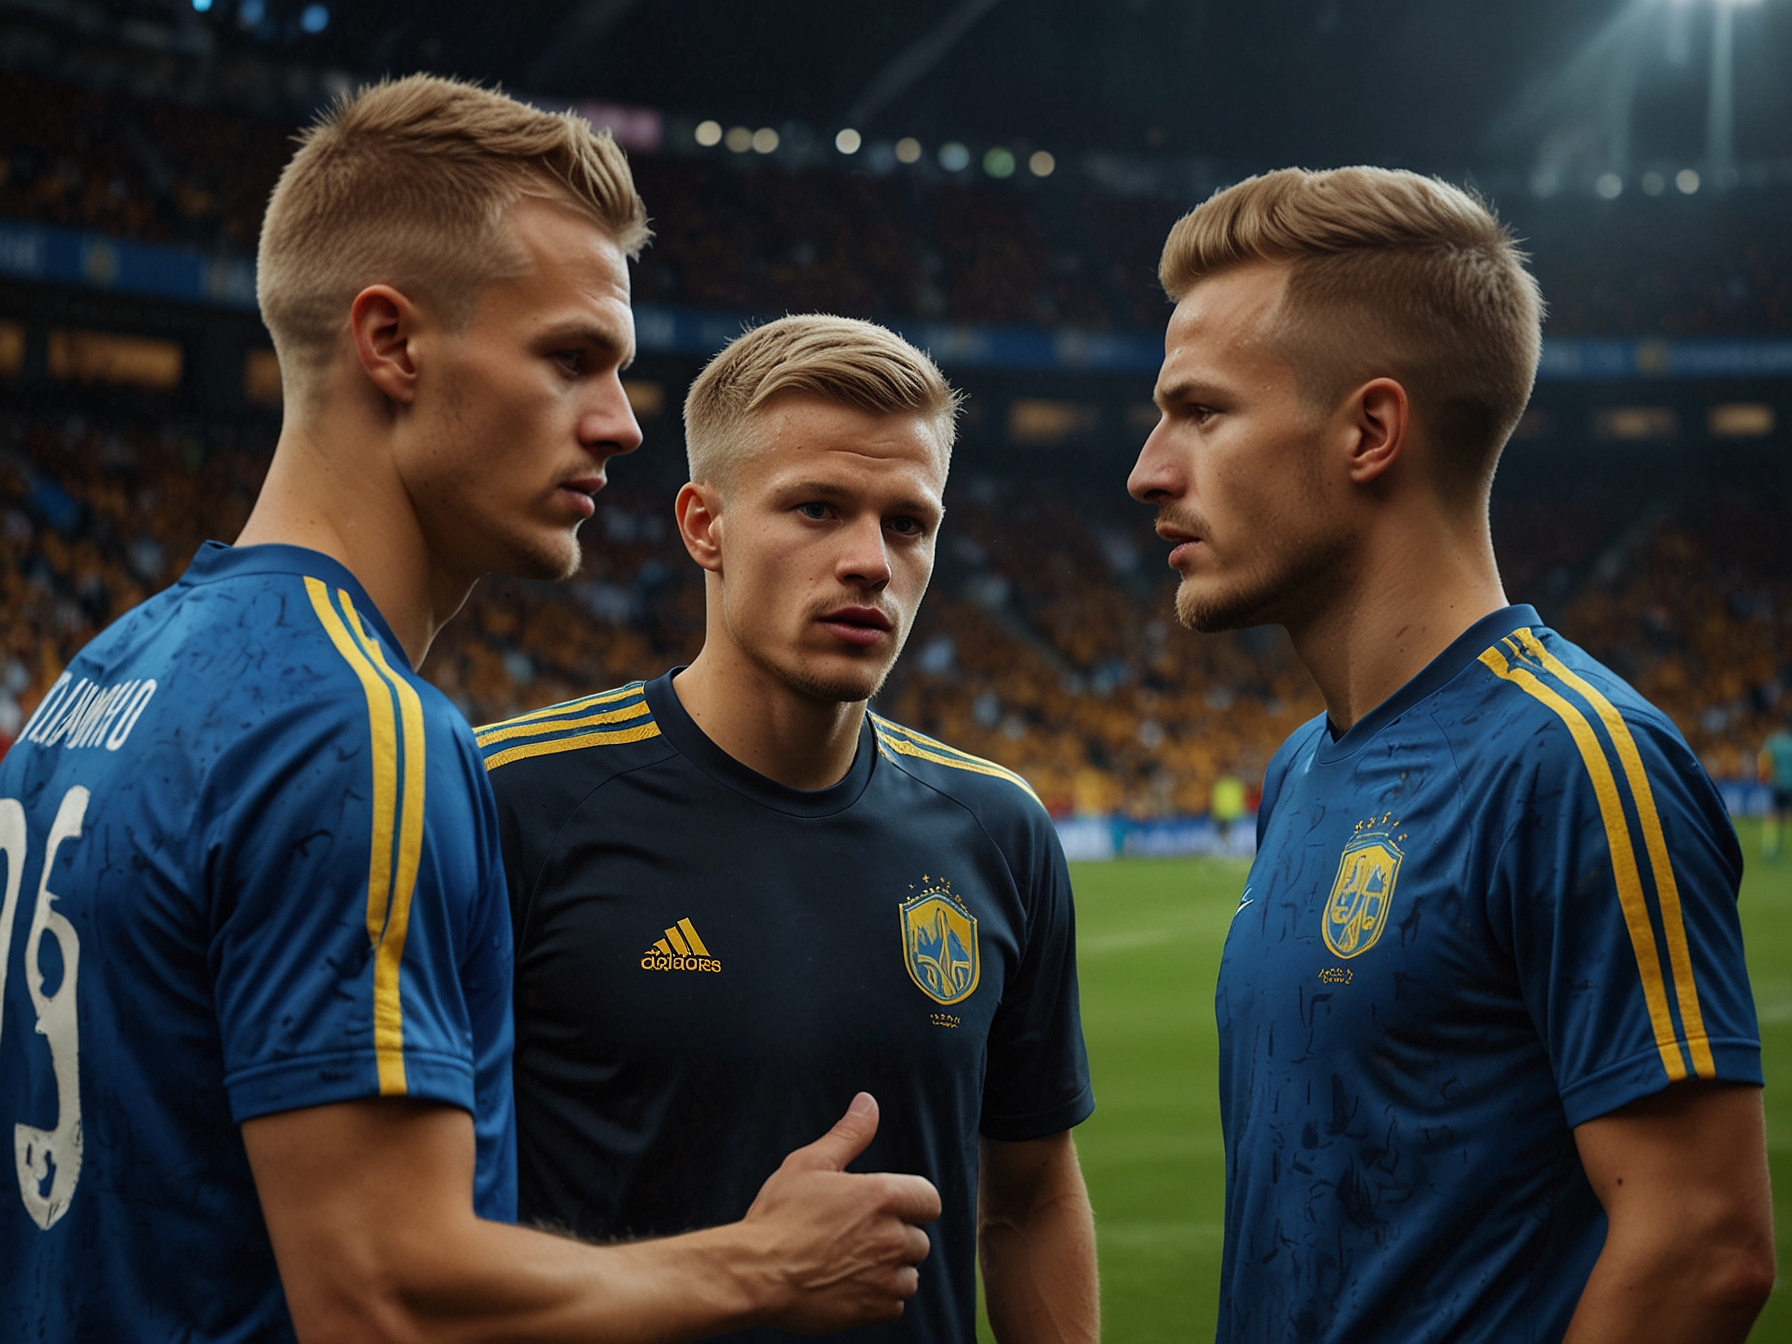 Ukrainian footballers Oleksandr Zinchenko and Andriy Yarmolenko discussing tactics with their manager on the field, as they gear up for the crucial match against Romania.